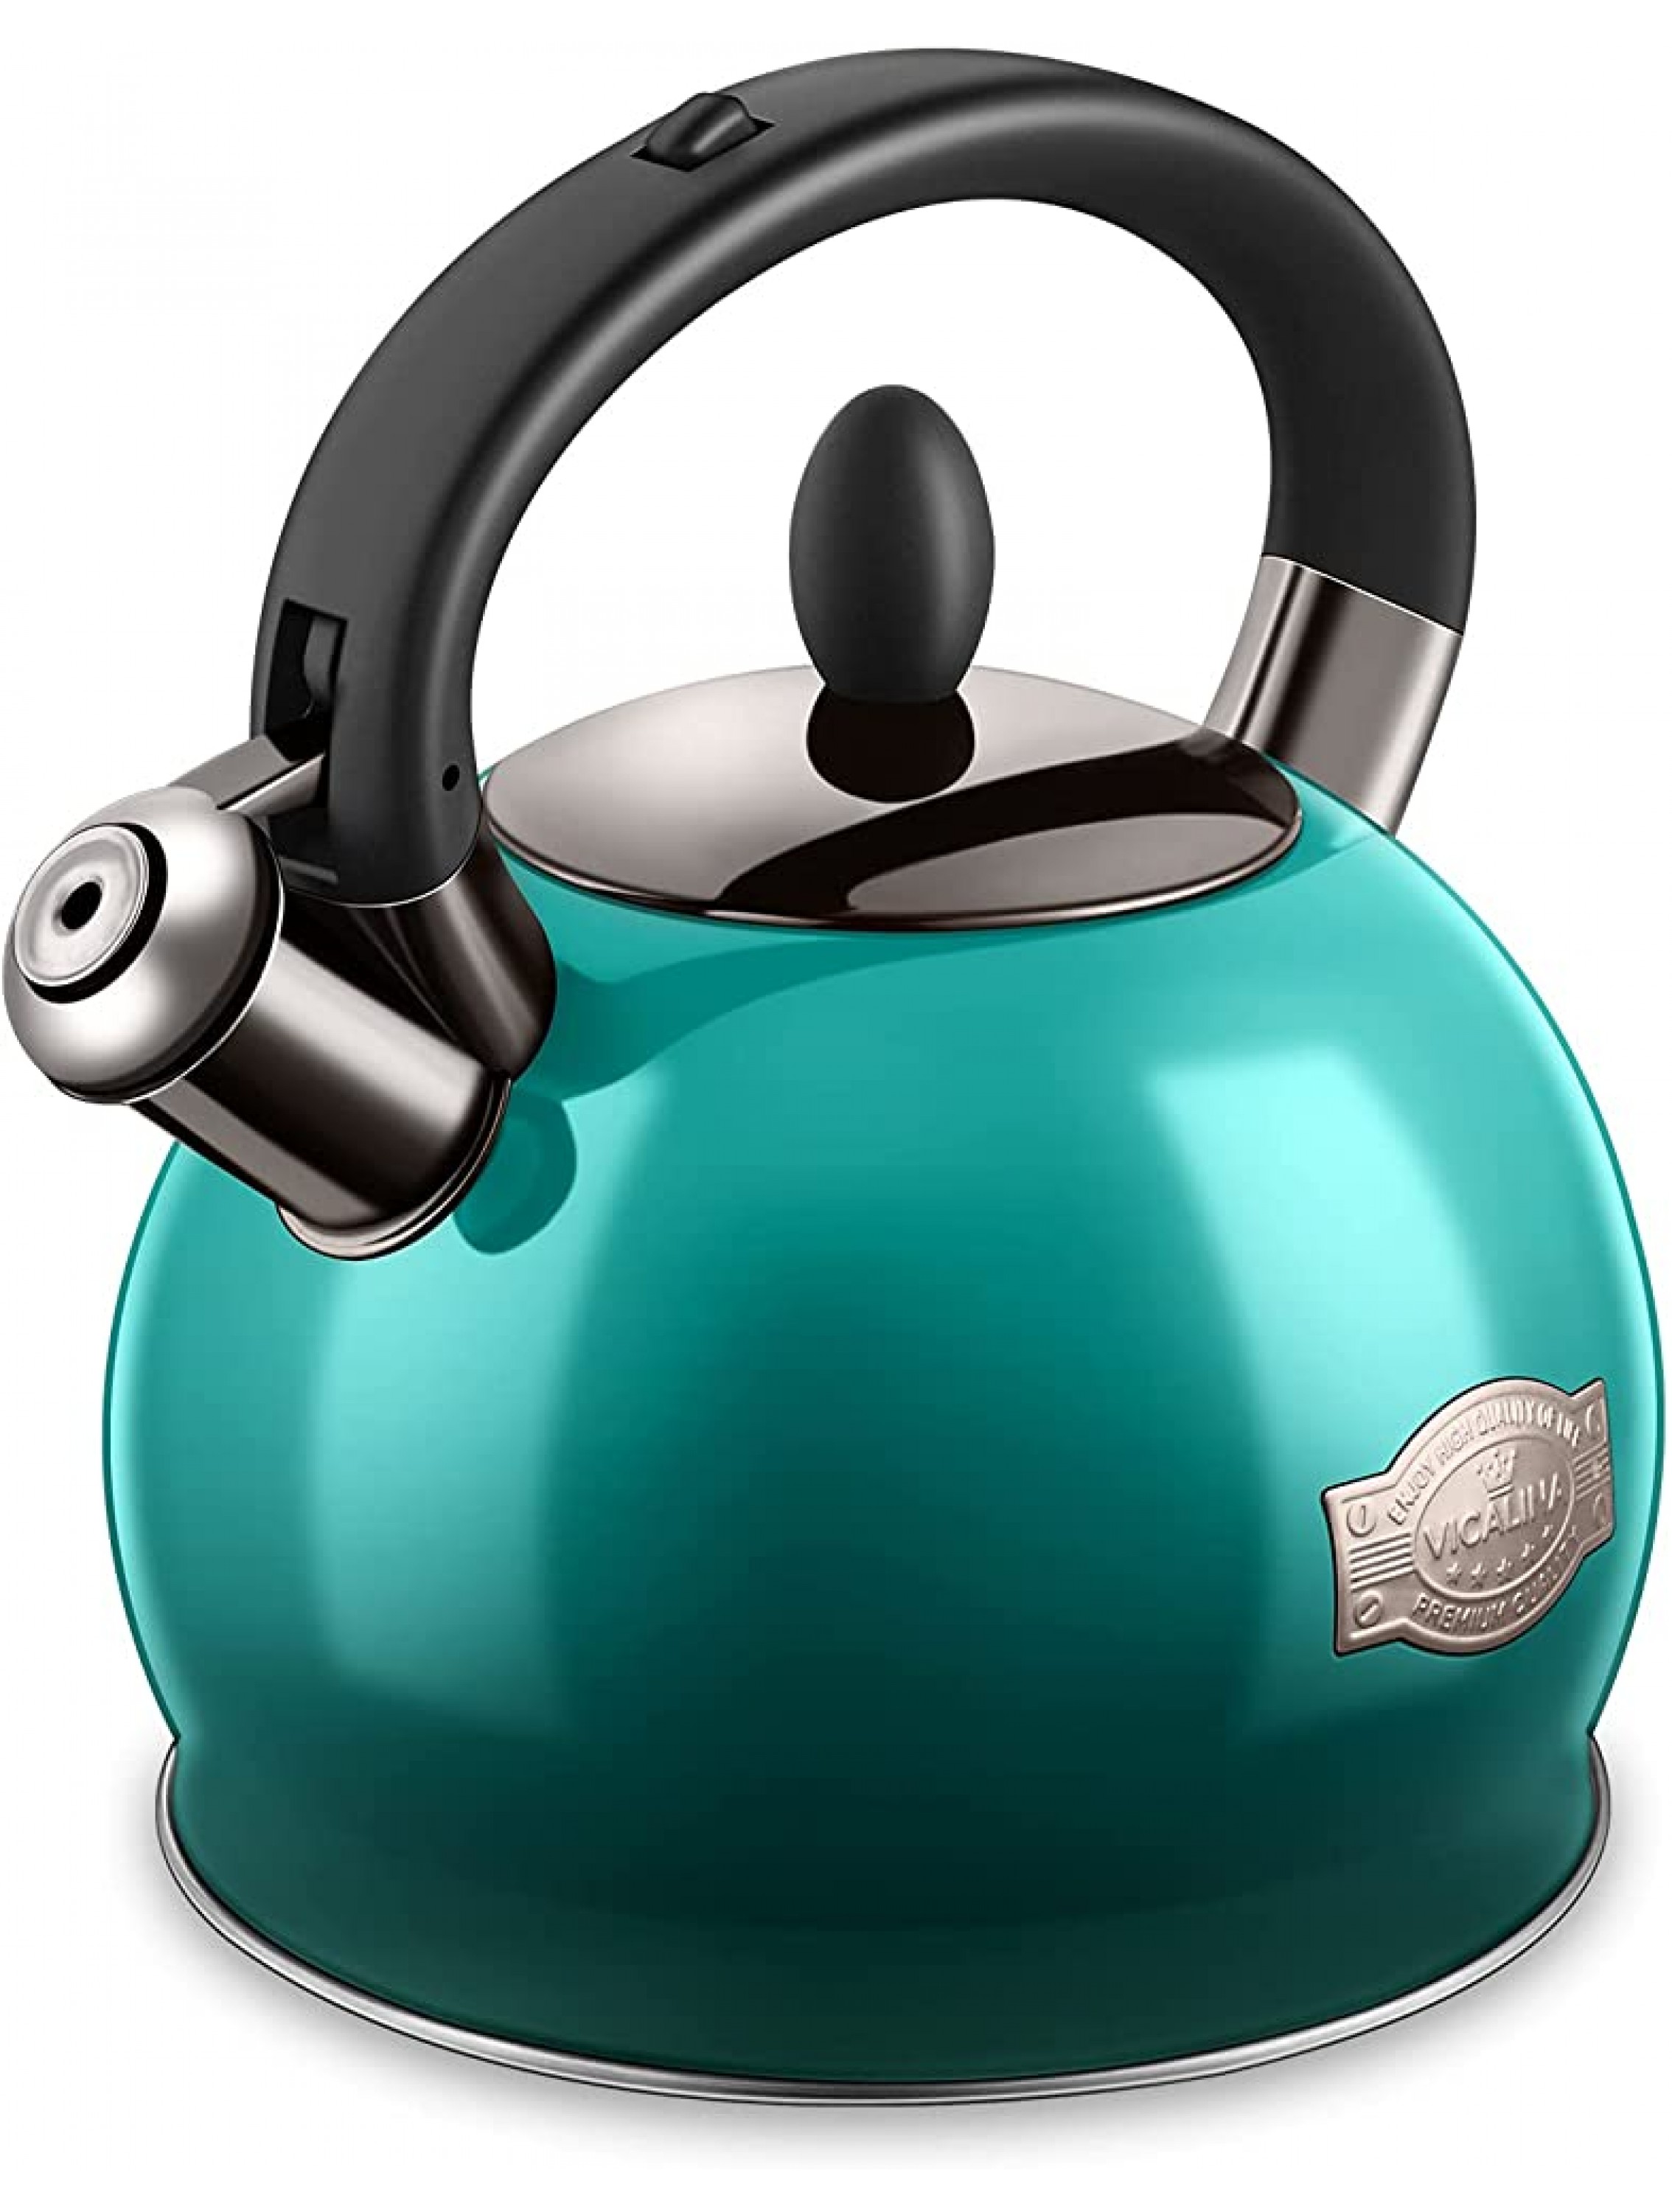 VICALINA Tea Kettle & Tea Pot Stainless Steel Tea Kettle for Stove top 2.64 Quart Whistling Loud Tea Kettles Polished Gradient Green Blue - B43WC7B6Y